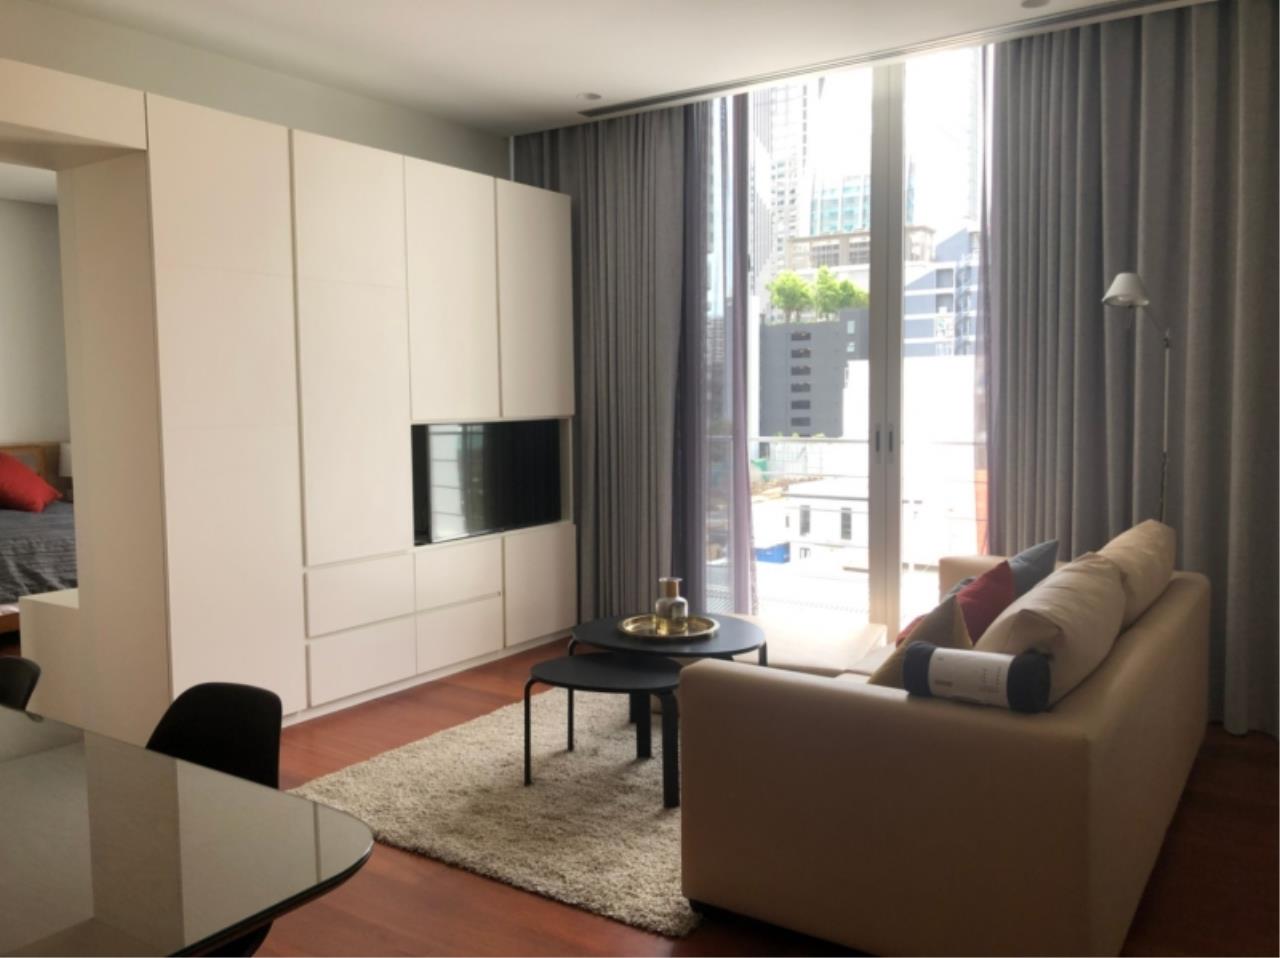 Century21 Skylux Agency's 33 Serviced Apartment / Apartment (Serviced) For Rent / 2 Bedroom / 110 SQM / BTS Asok / Bangkok 4